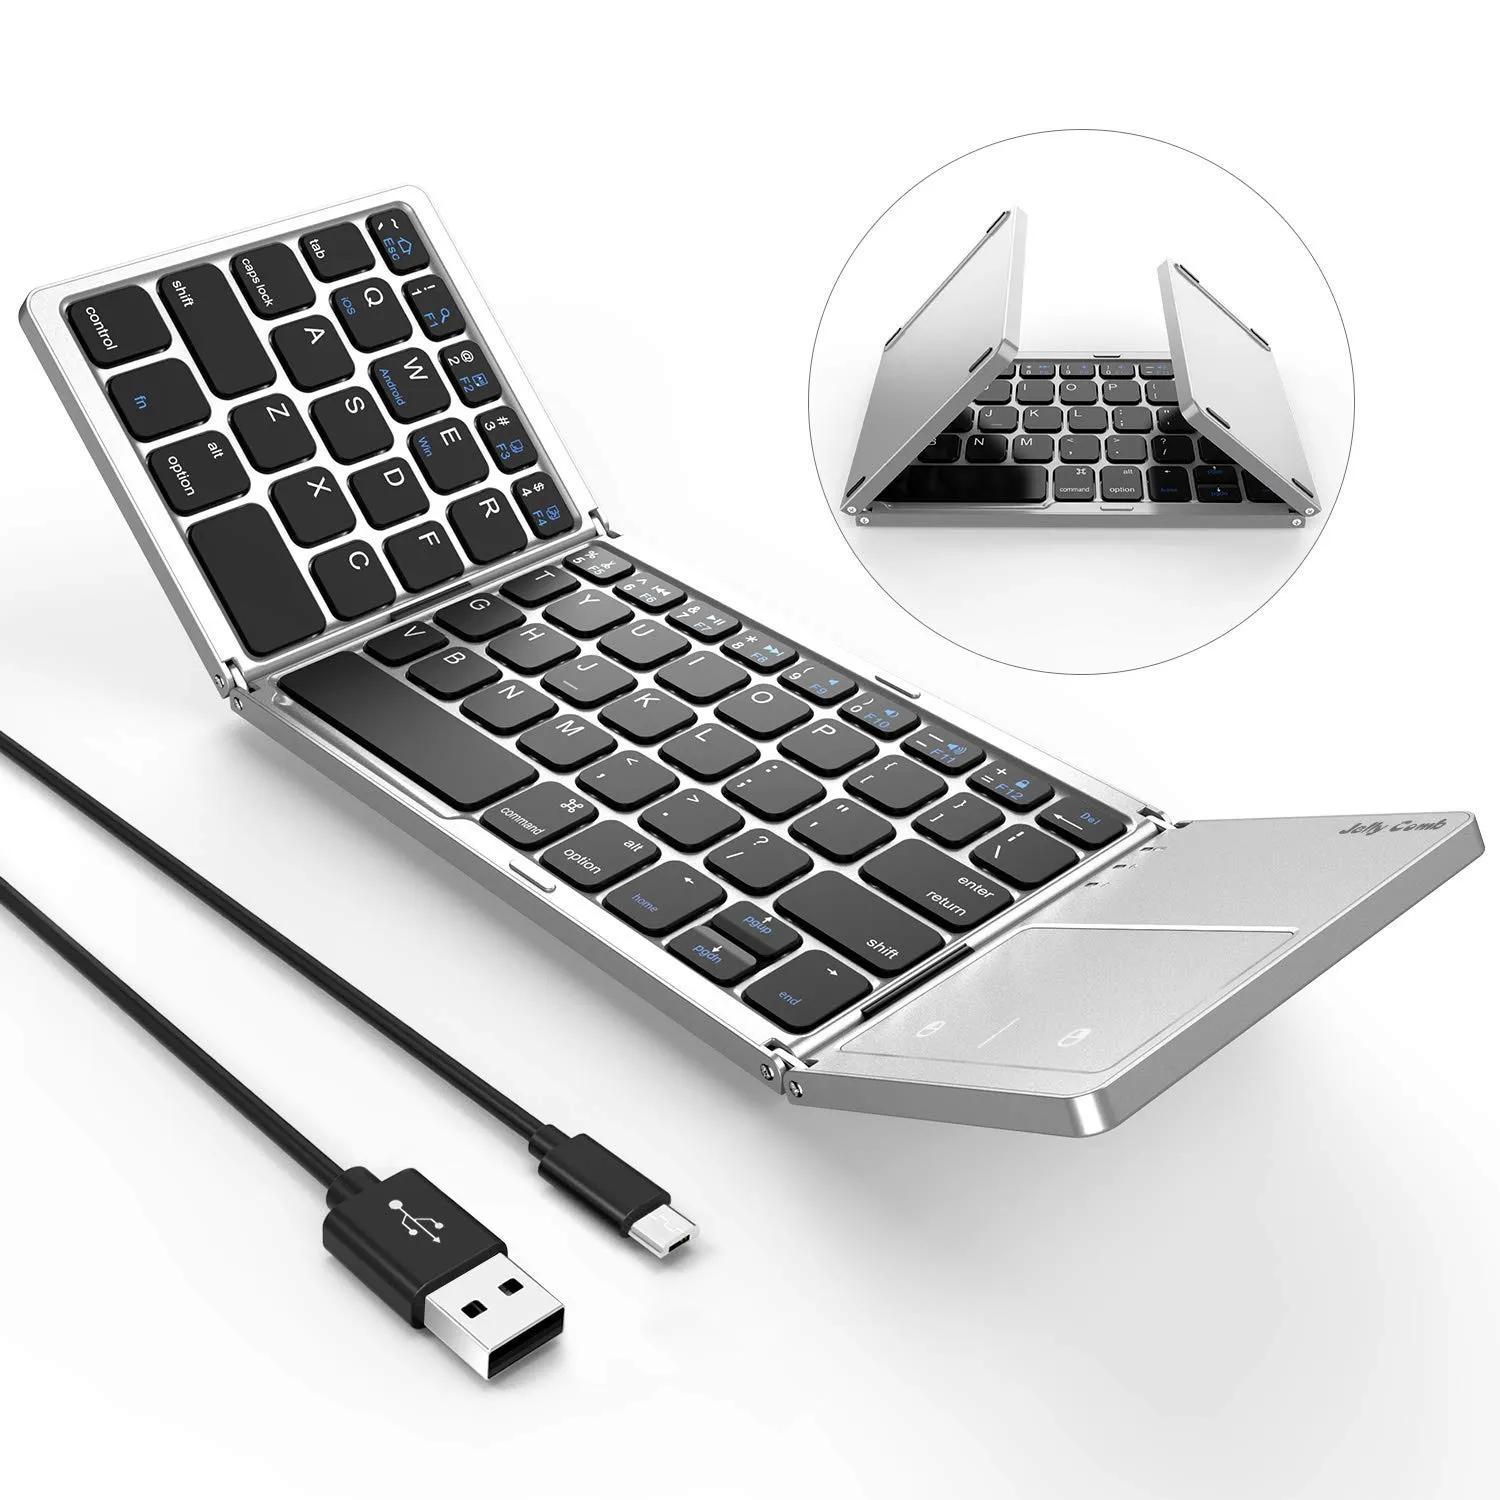 Foldable Bluetooth Keyboard, Dual Mode USB Wired & Bluetooth Keyboard with Touchpad Rechargeable for Android,iOS,Windows Tablet Smartphone